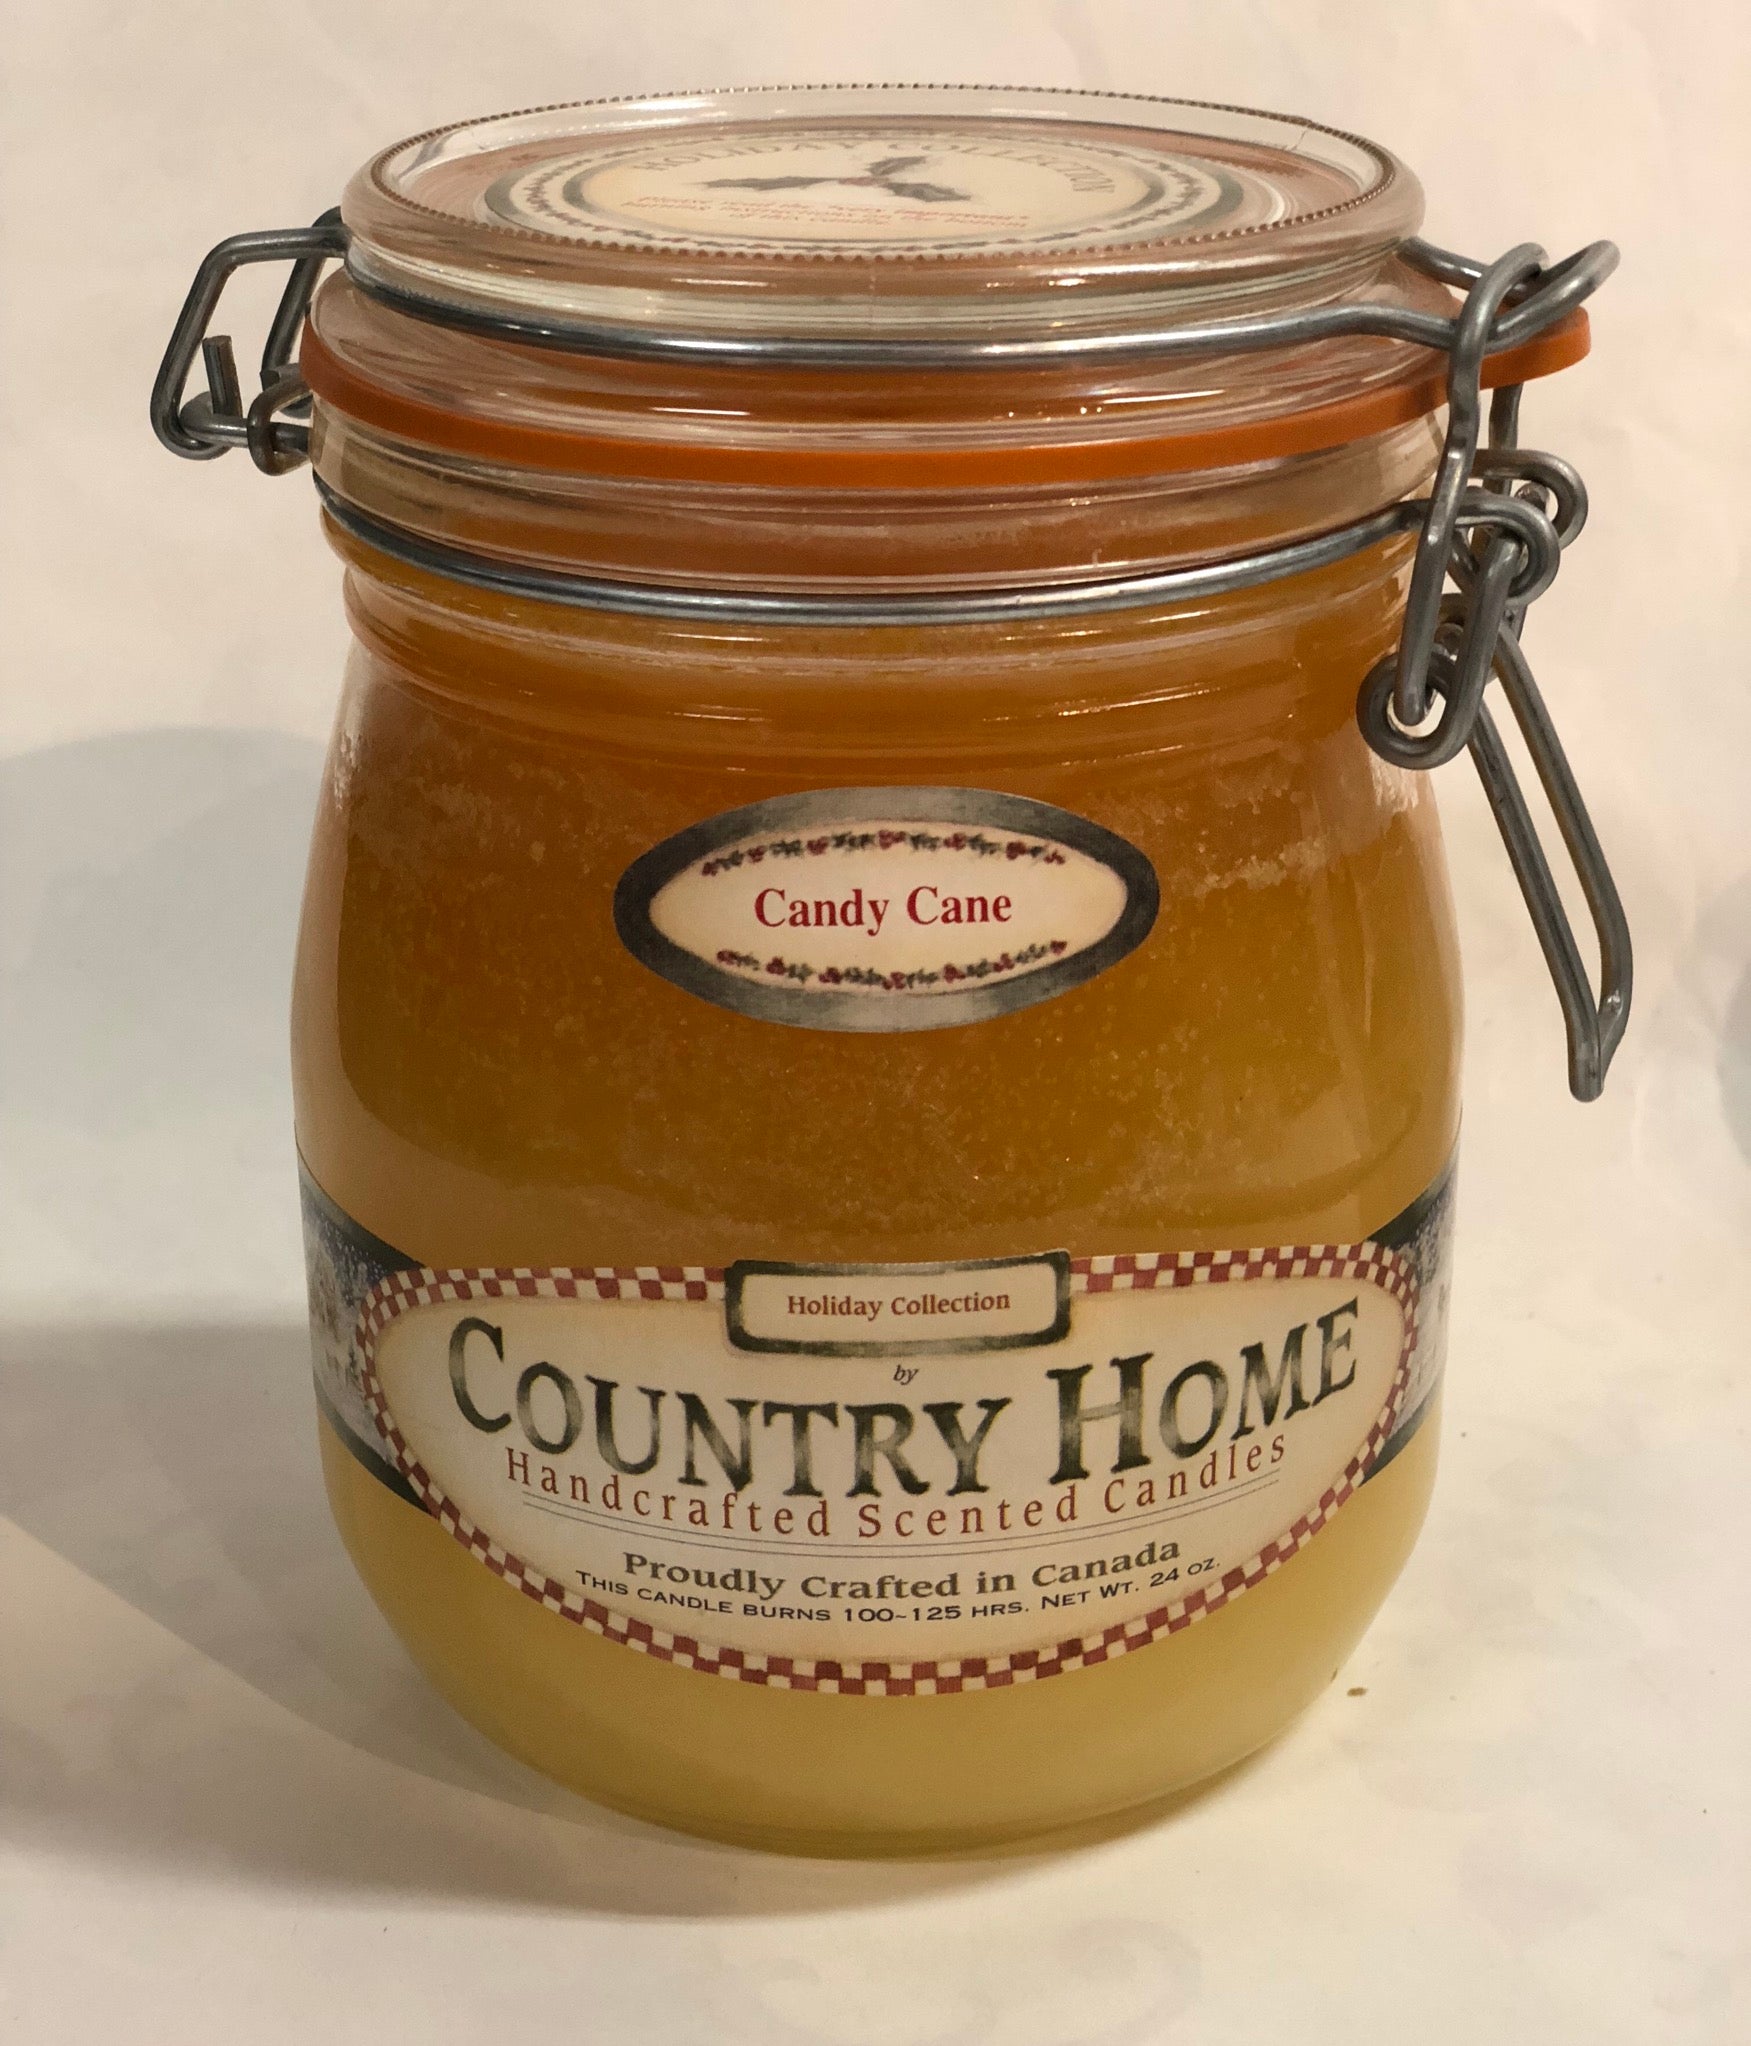 Country Home Jar Candle - Candy Cane